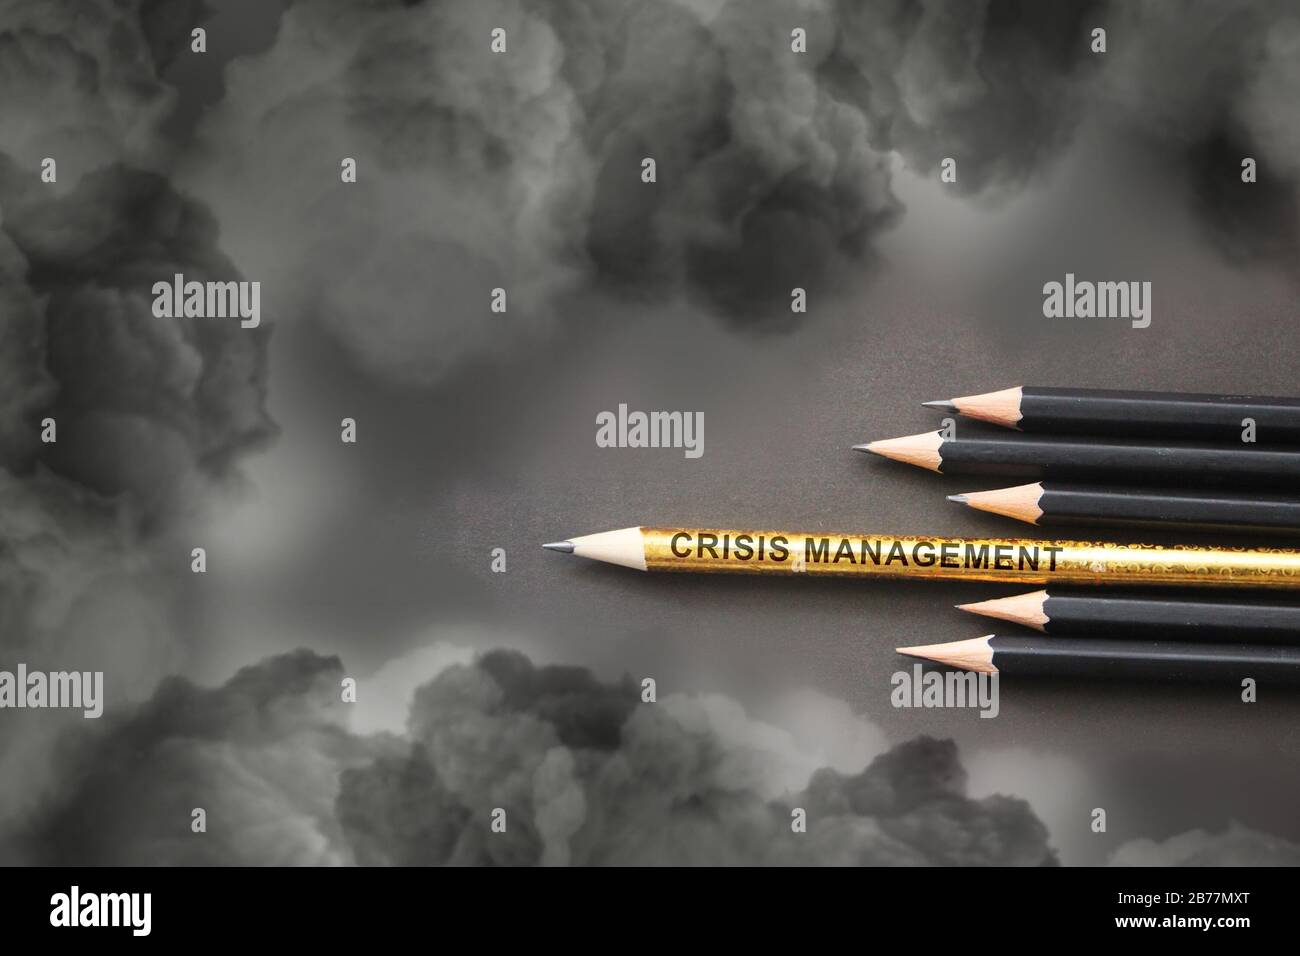 Crisis Management written on pencil composition reminding weapons against heavy clouds. Crisis management or risk assets concept Stock Photo